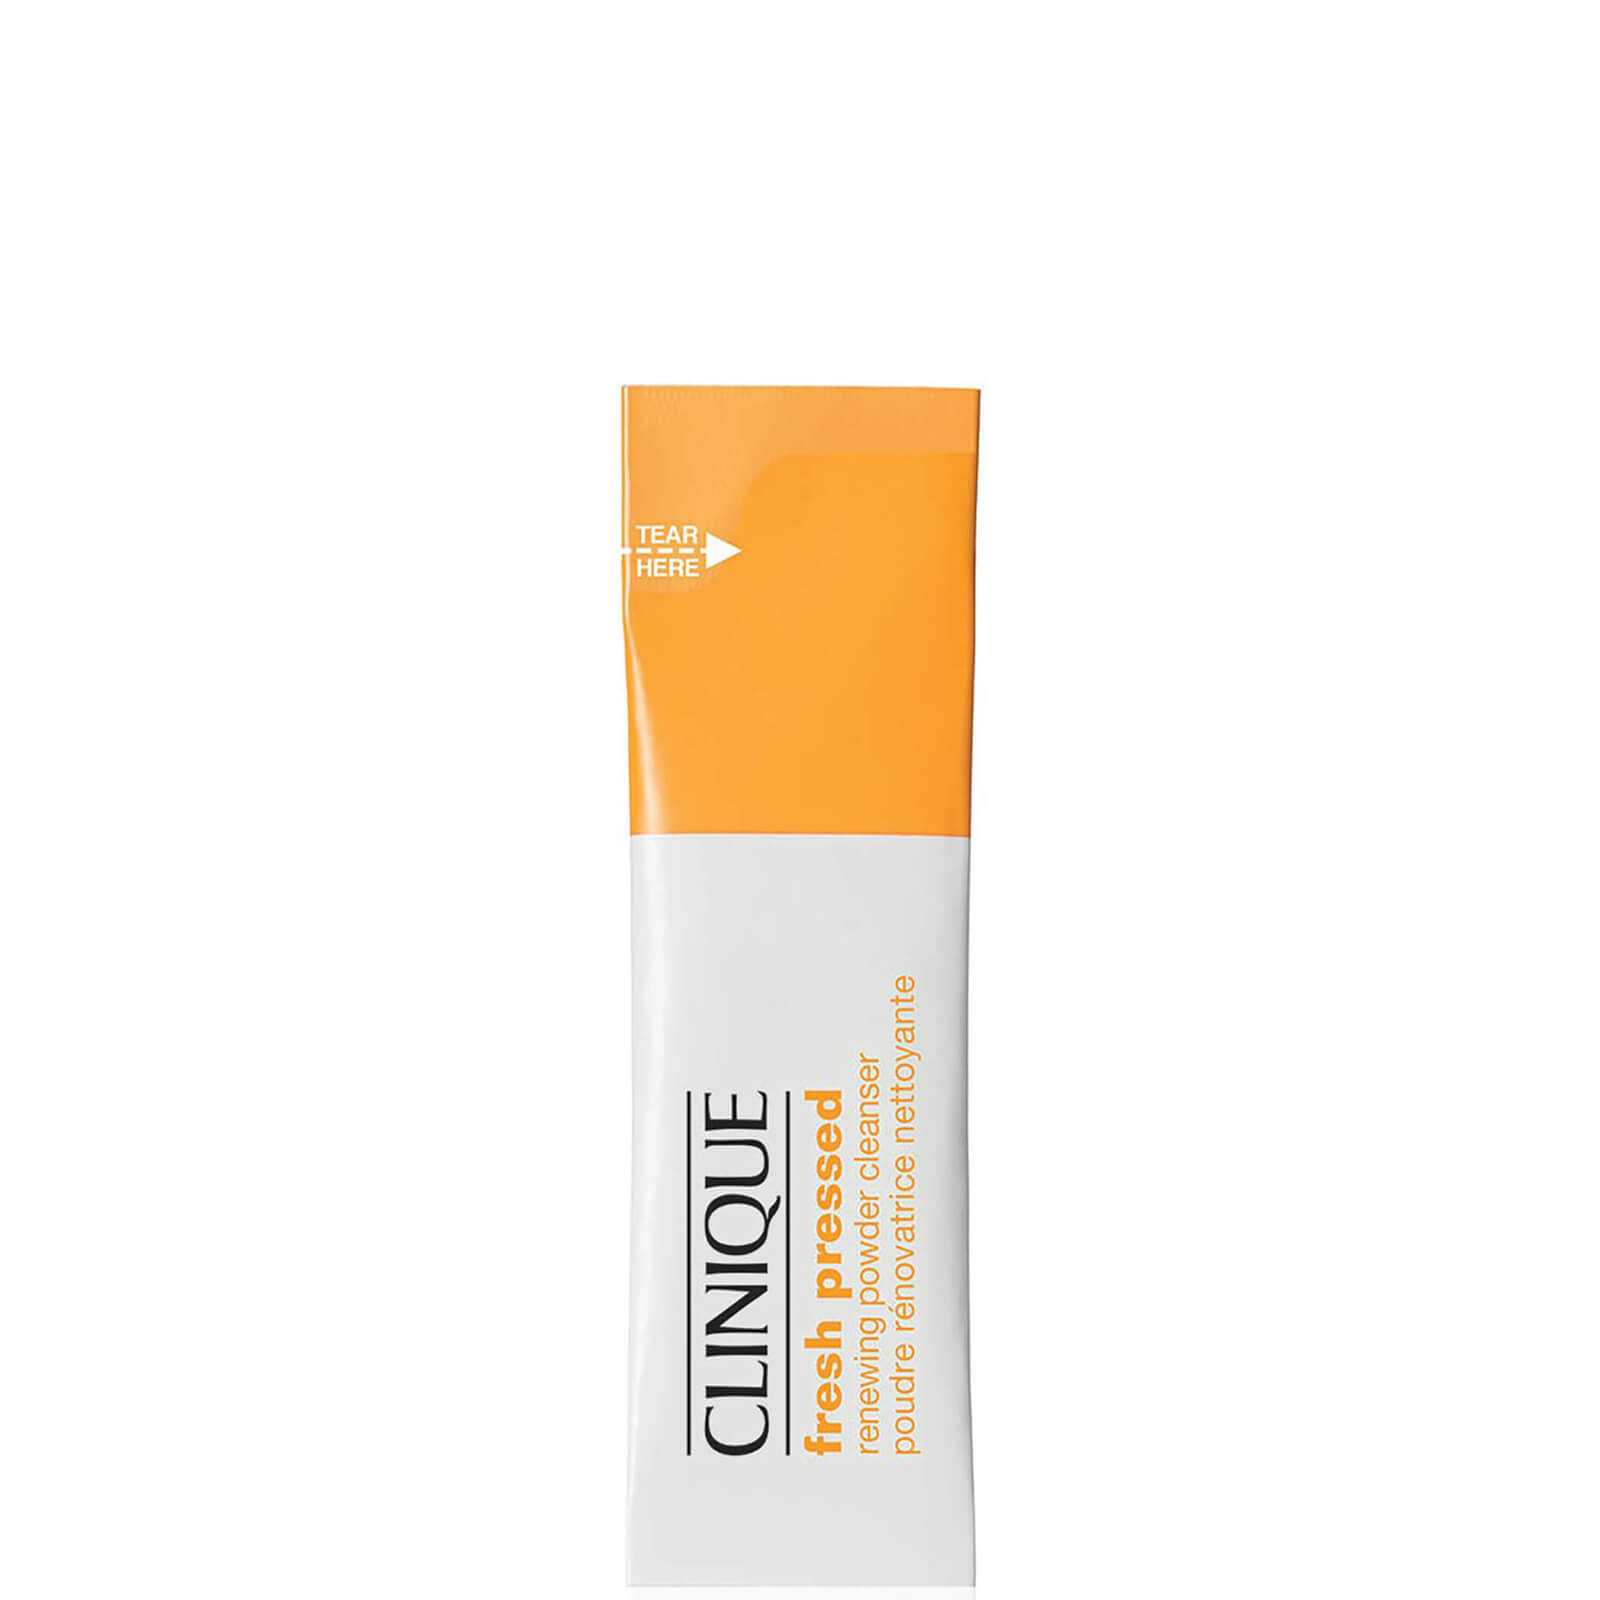 Clinique Fresh Pressedtm Renewing Powder Cleanser with Pure Vitamin C